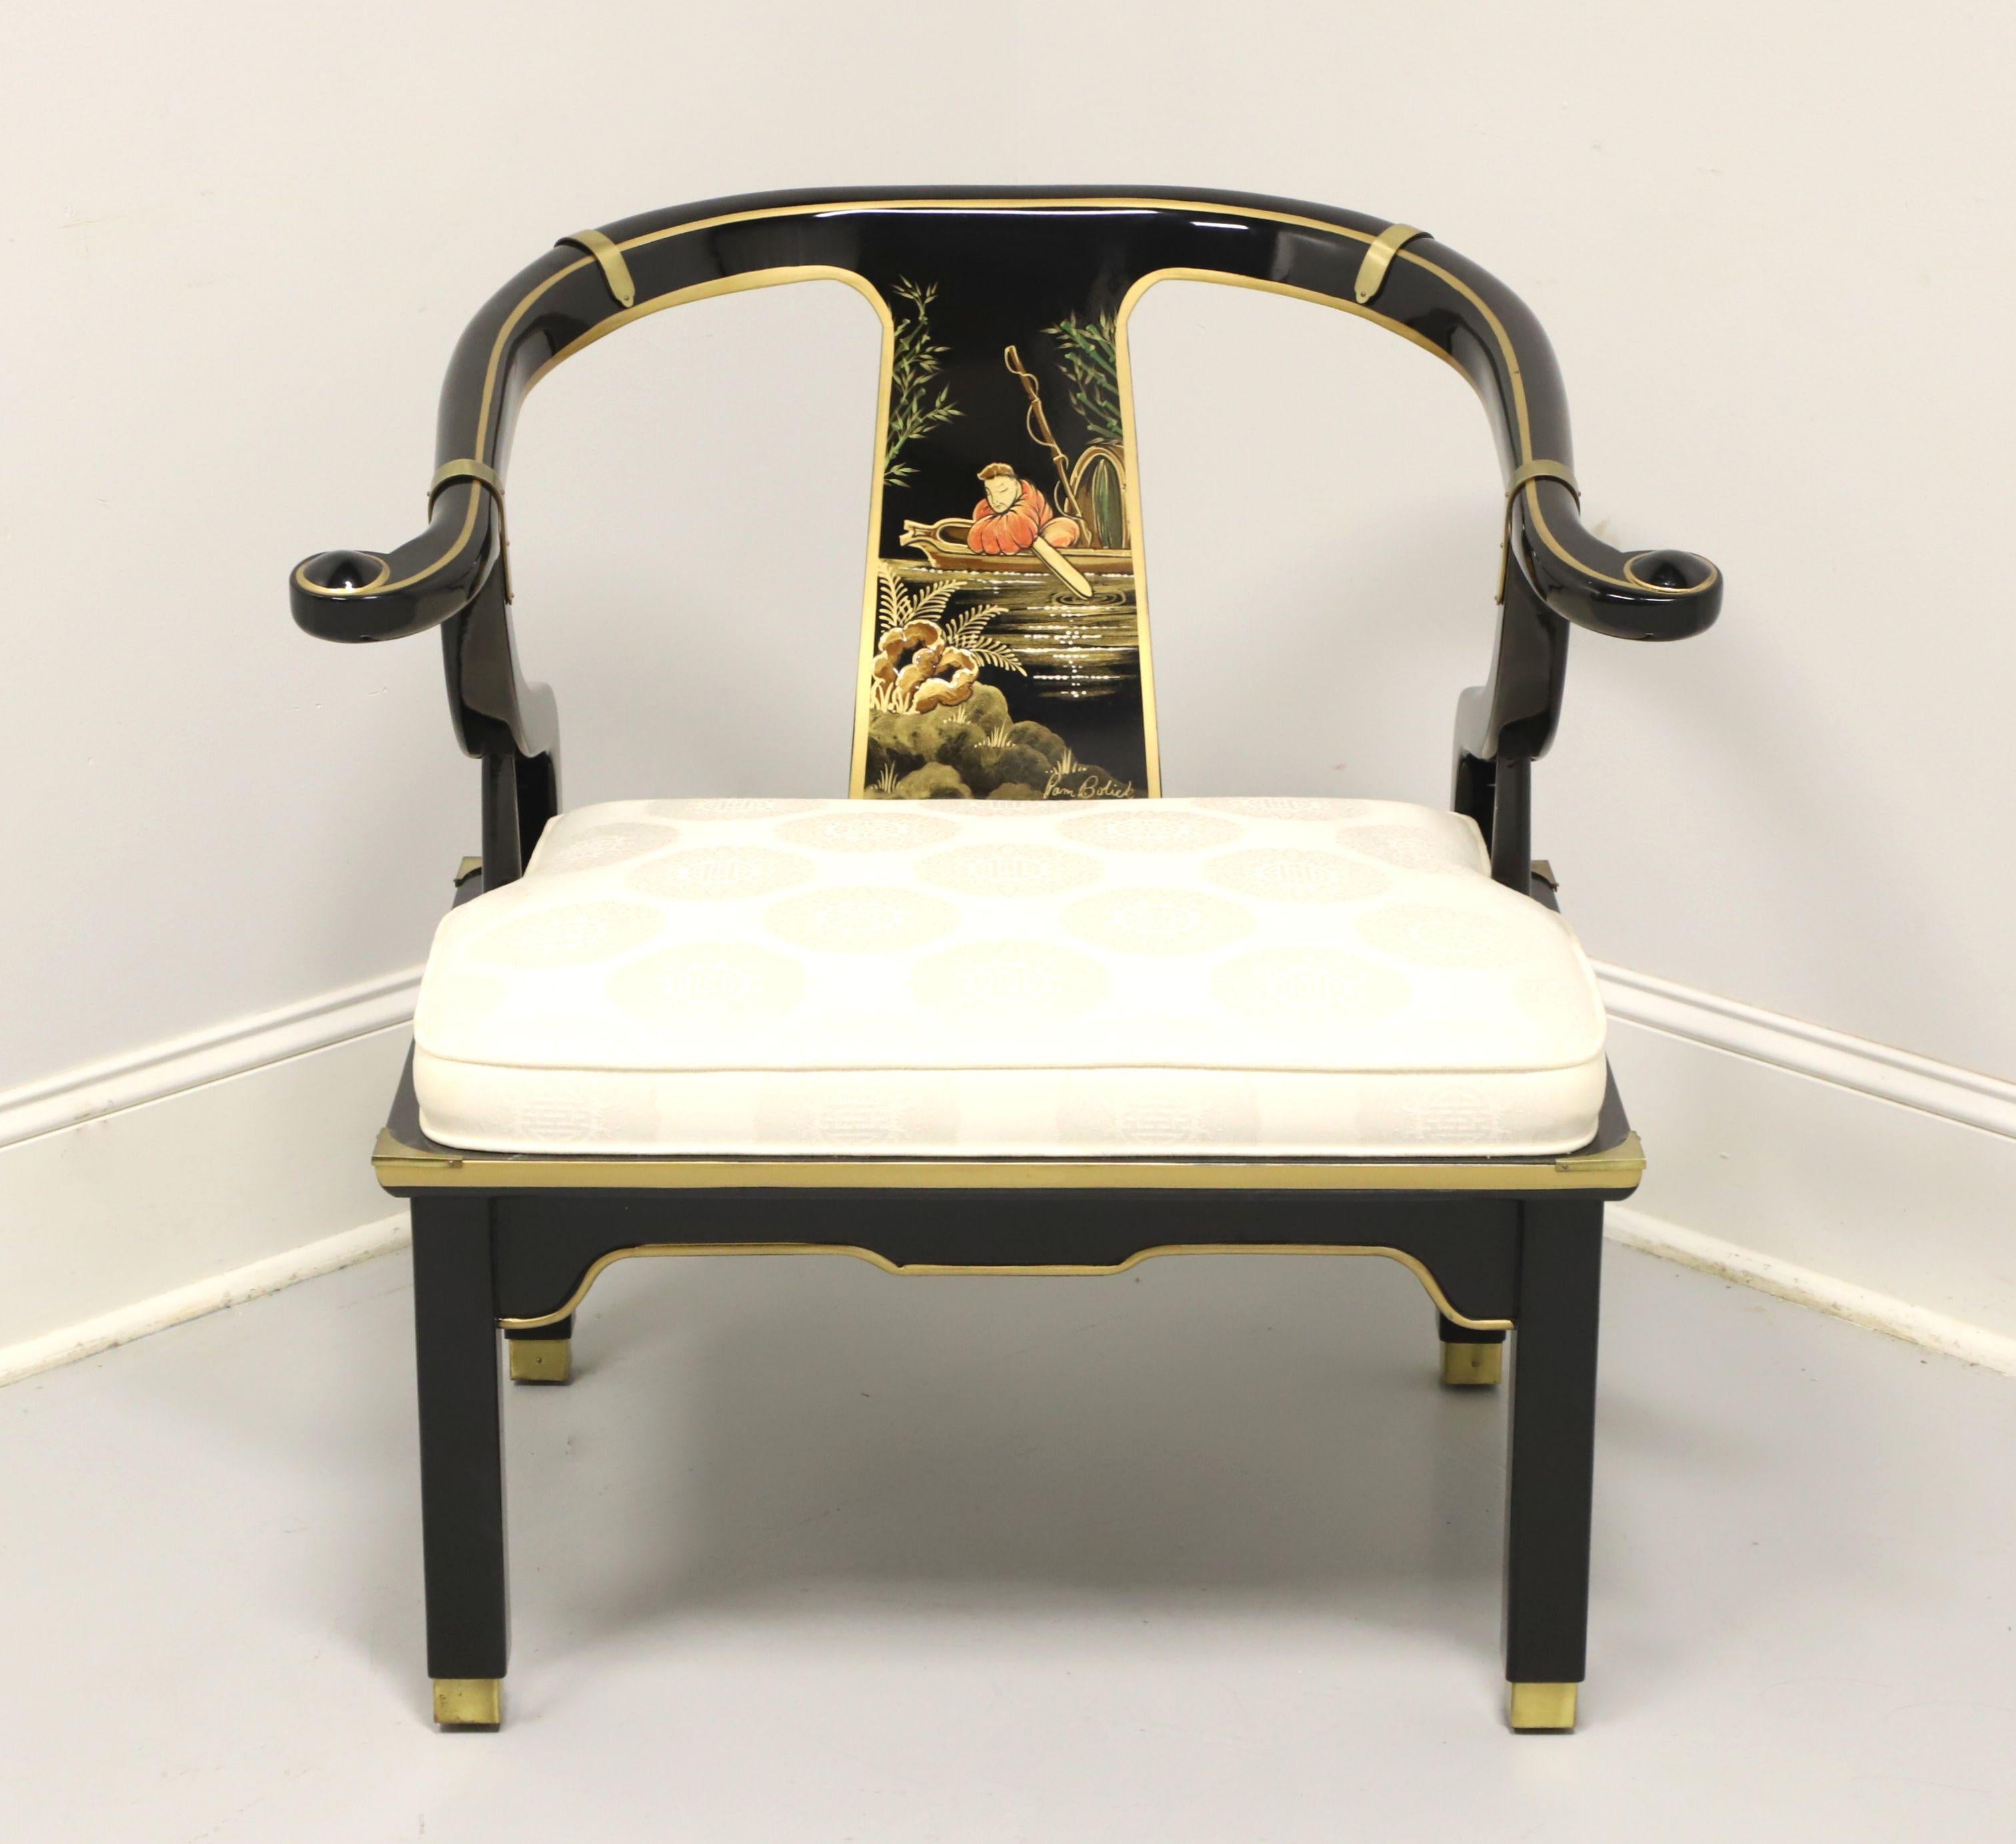 An Asian Chinoiserie Ming style horseshoe armchair in a James Mont design by Century Furniture, hand painted for them by Pam Bolick. Solid wood frame with black lacquer, gold painted accents, custom painted backrest, horseshoe shaped arms, carved